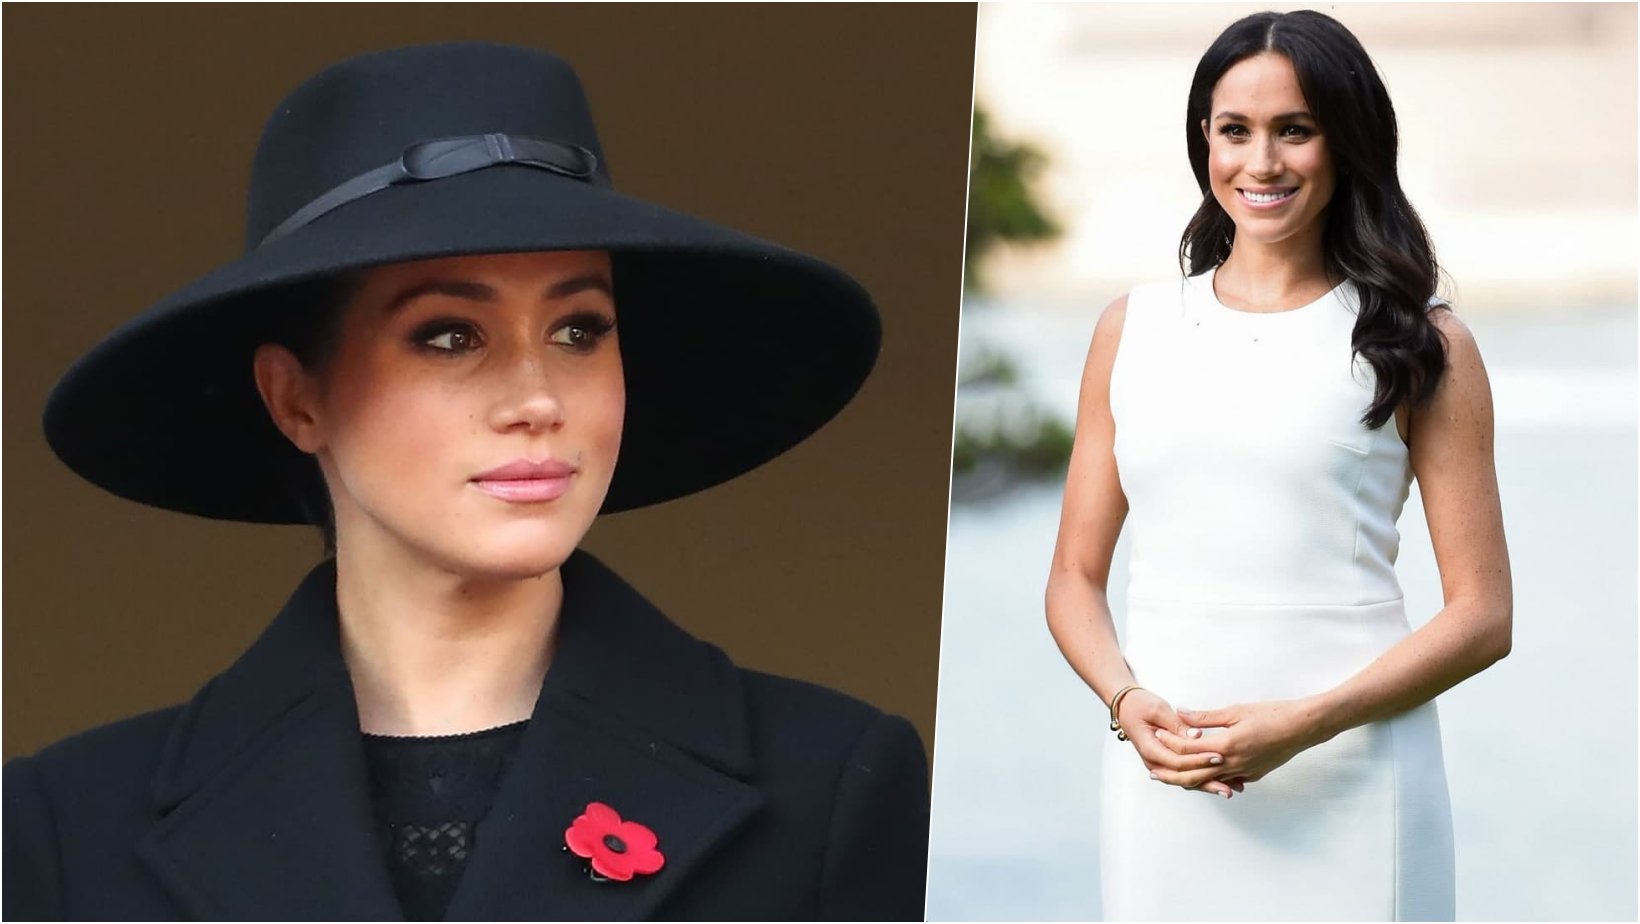 6 facebook cover.jpg?resize=412,275 - Meghan Markle’s Lawyer Shut Down Allegations That The Duchess “BULLIED” Staff Members Of The Palace